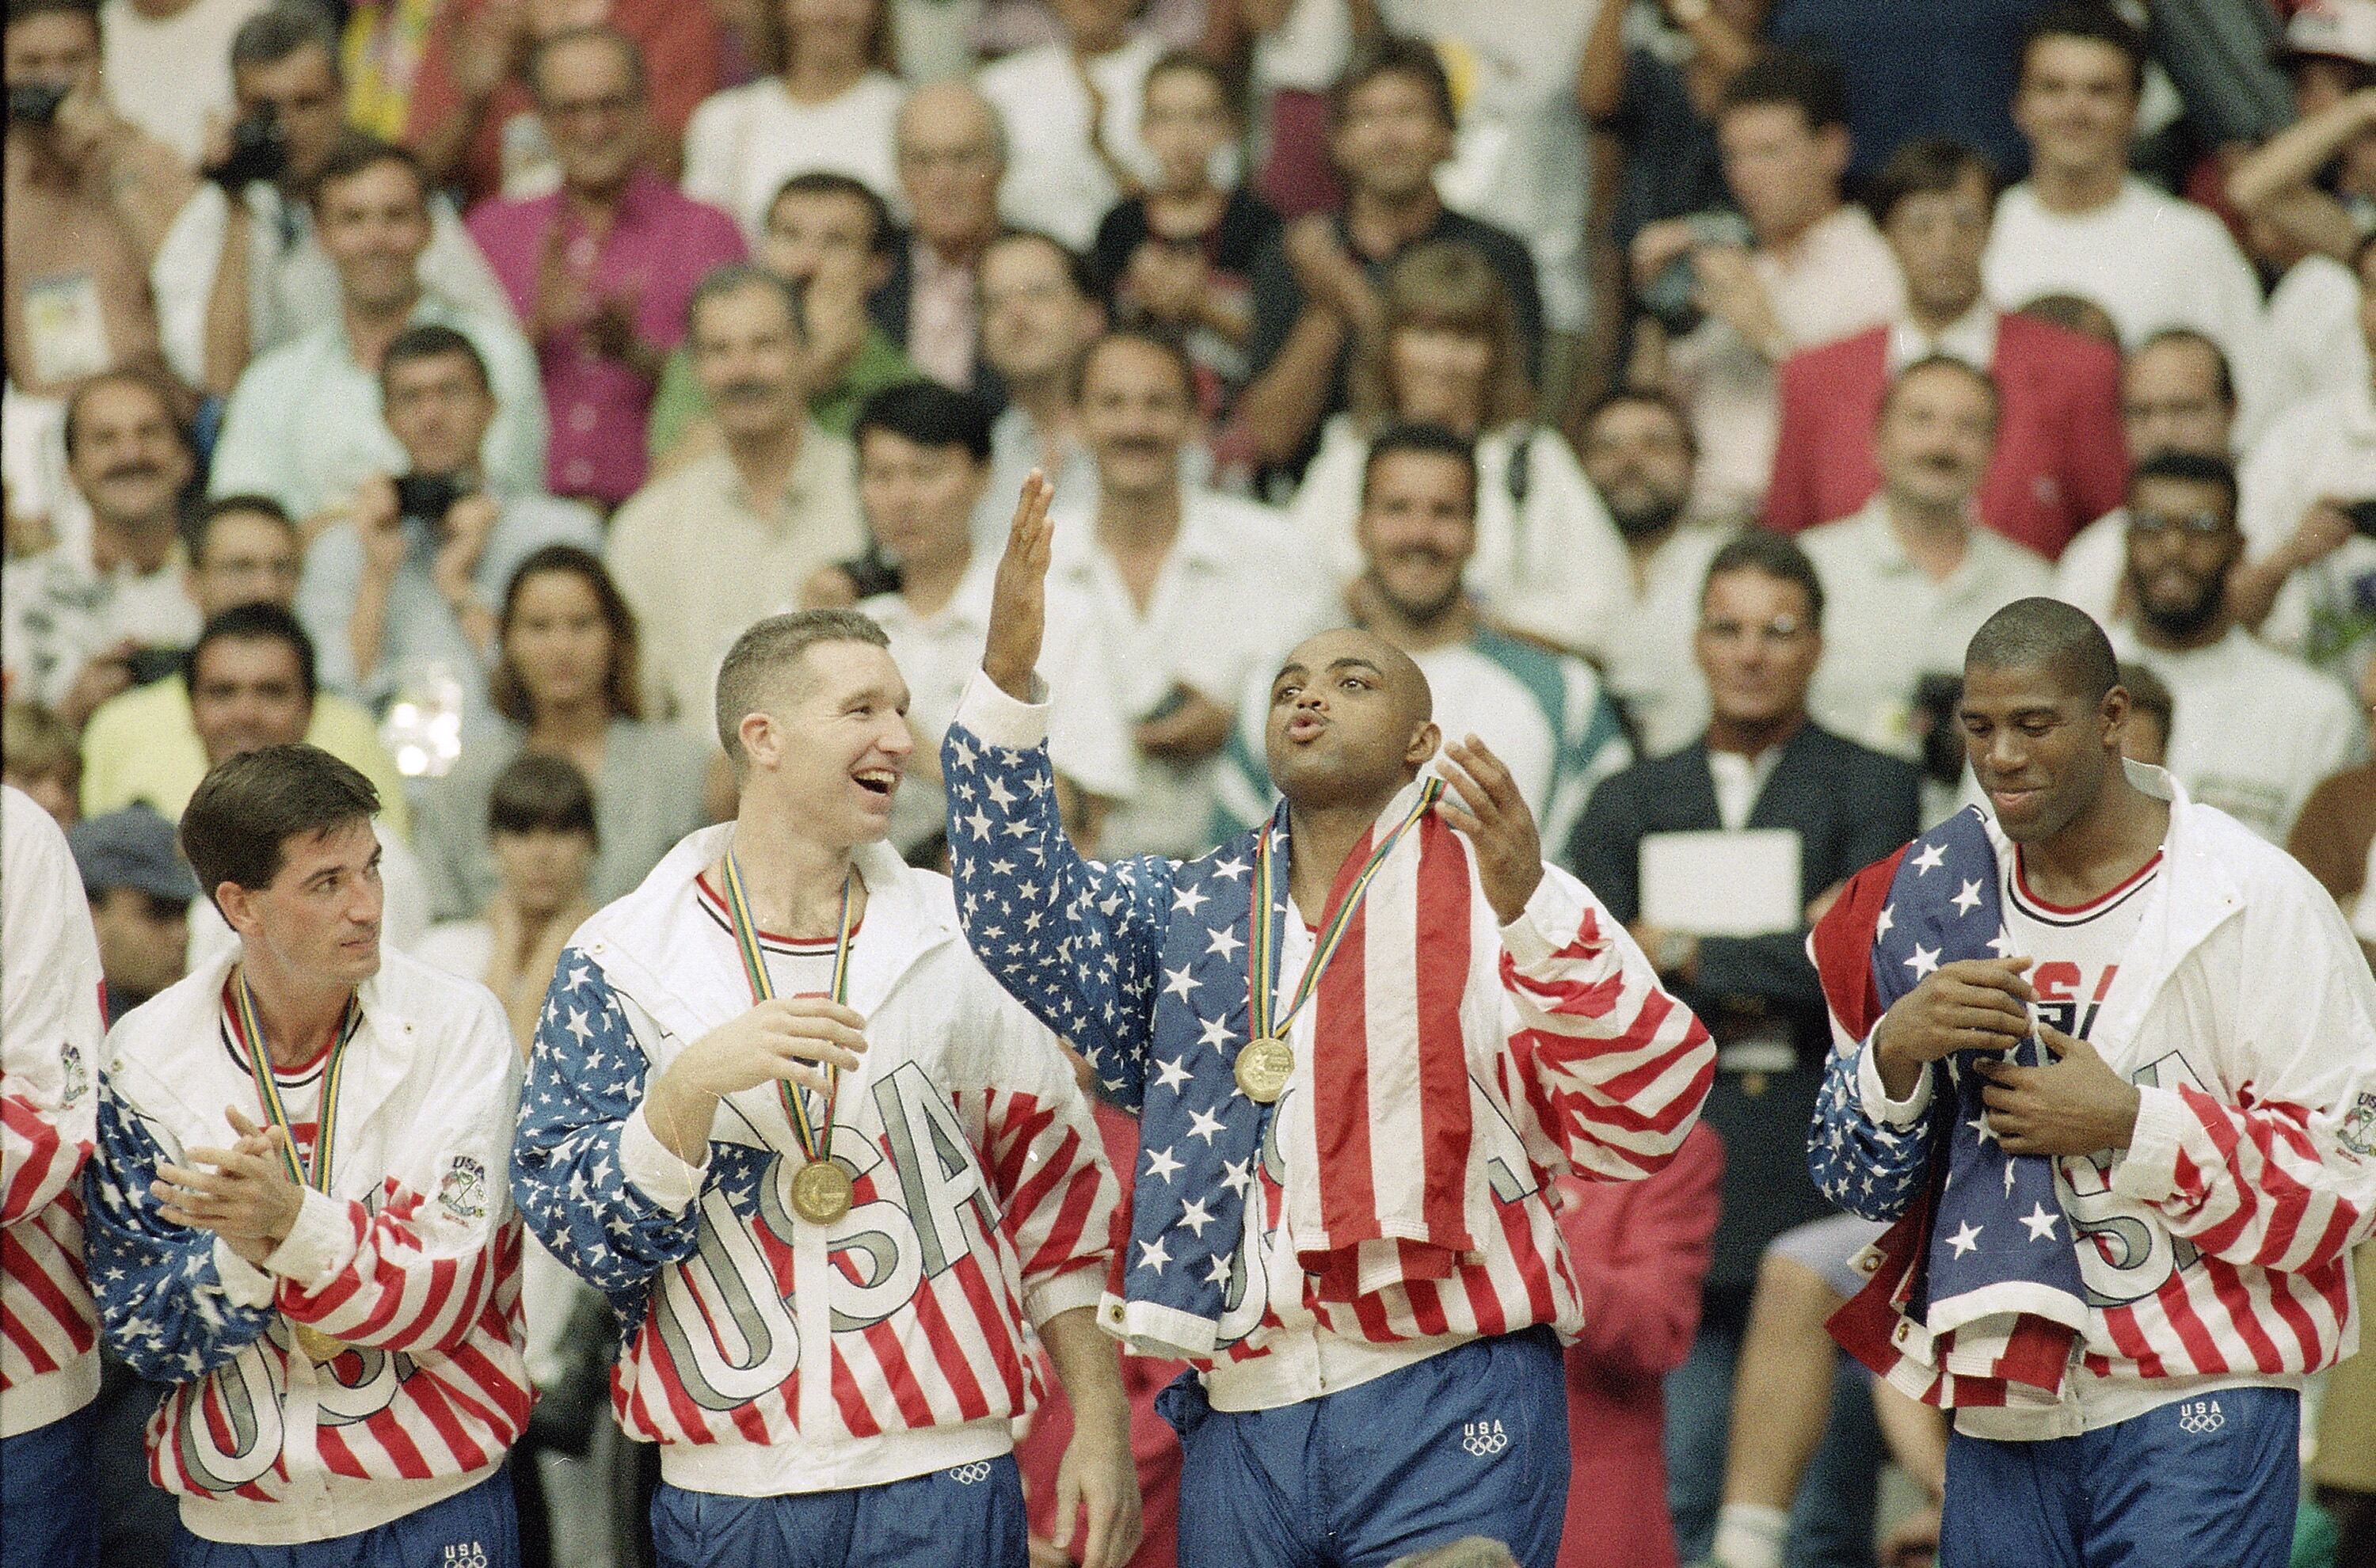 (Jeremy Harmon | Salt Lake Tribune) From left the USA's John Stockton, Chris Mullin, and Charles Barkley rejoice with their gold medals after beating Croatia, 117-85 in Olympics basketball in Barcelona Saturday, Aug. 8, 1992. The USA beat Croatia 117-85 to win the gold medal.